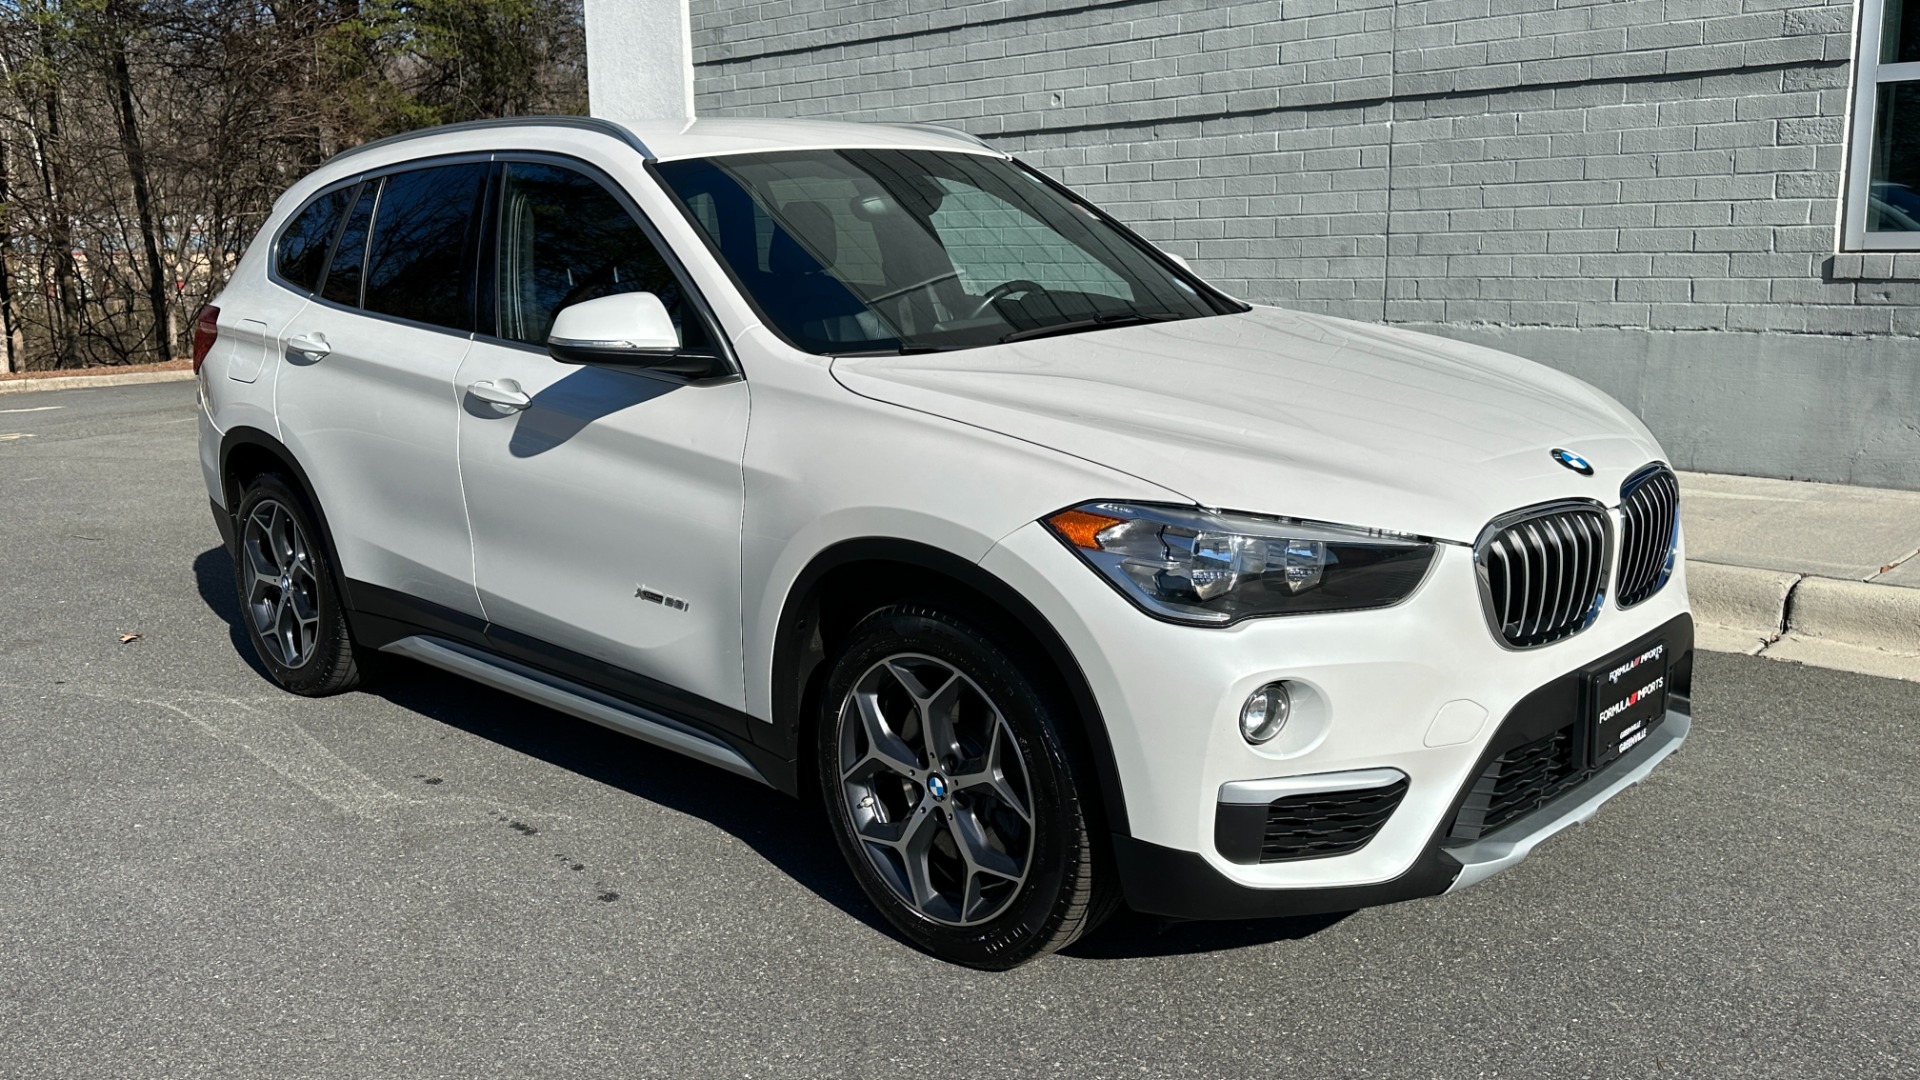 Used 2018 BMW X1 xDrive28i / DAKOTA LEATHER INTERIOR / HEATED STEERING / HEATED SEATS / NAVI for sale Sold at Formula Imports in Charlotte NC 28227 5